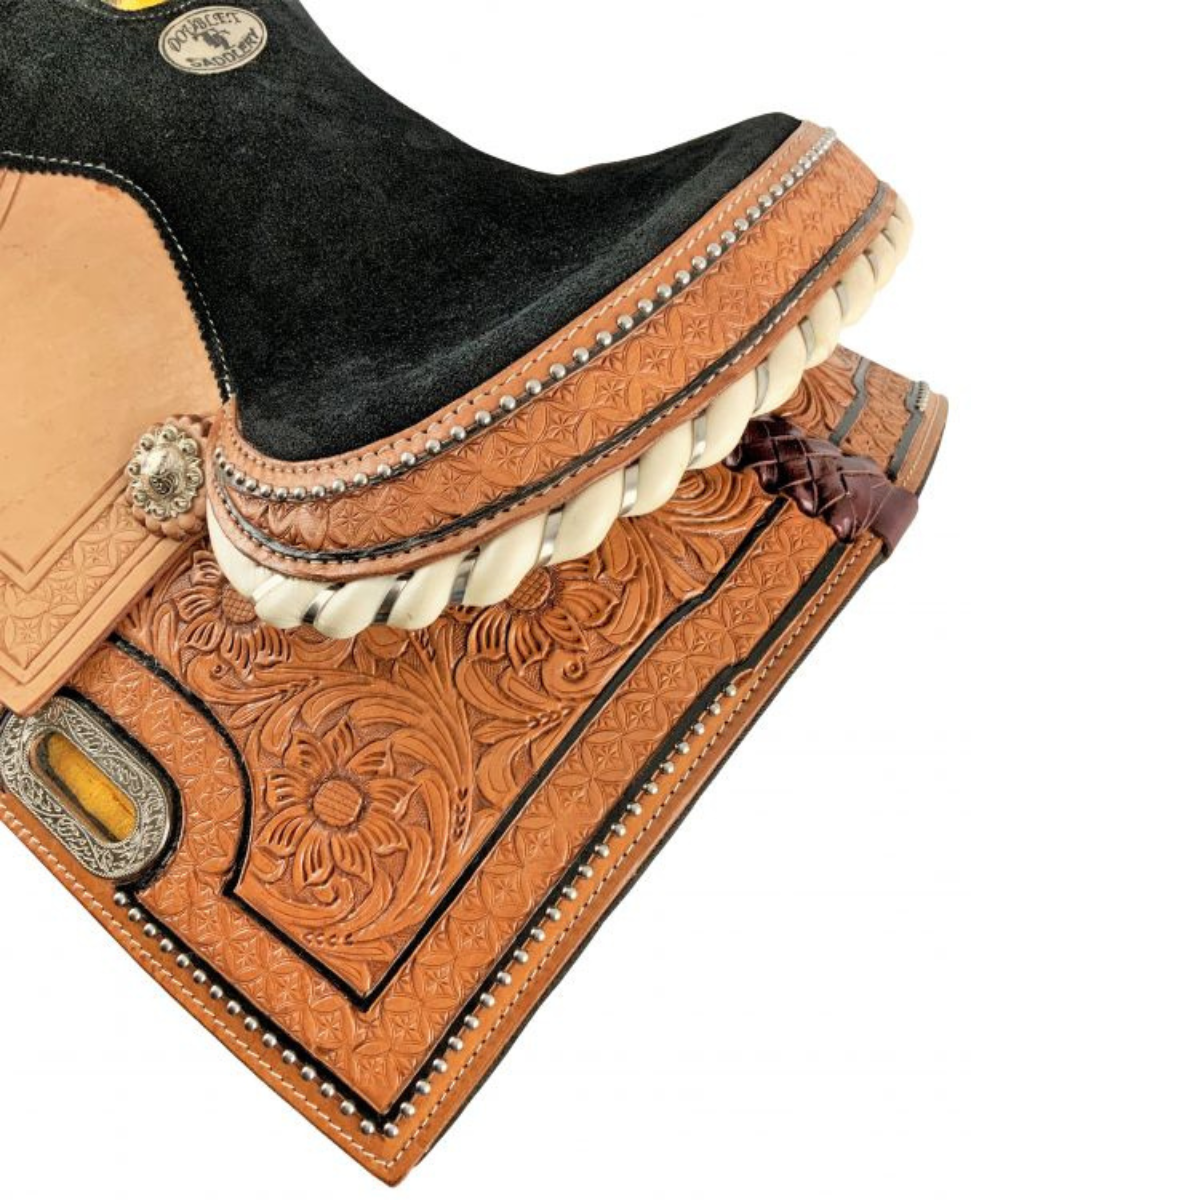 12" DOUBLE T  YOUTH BARREL STYLE SADDLE WITH HAND FLORAL TOOLING - Double T Saddles